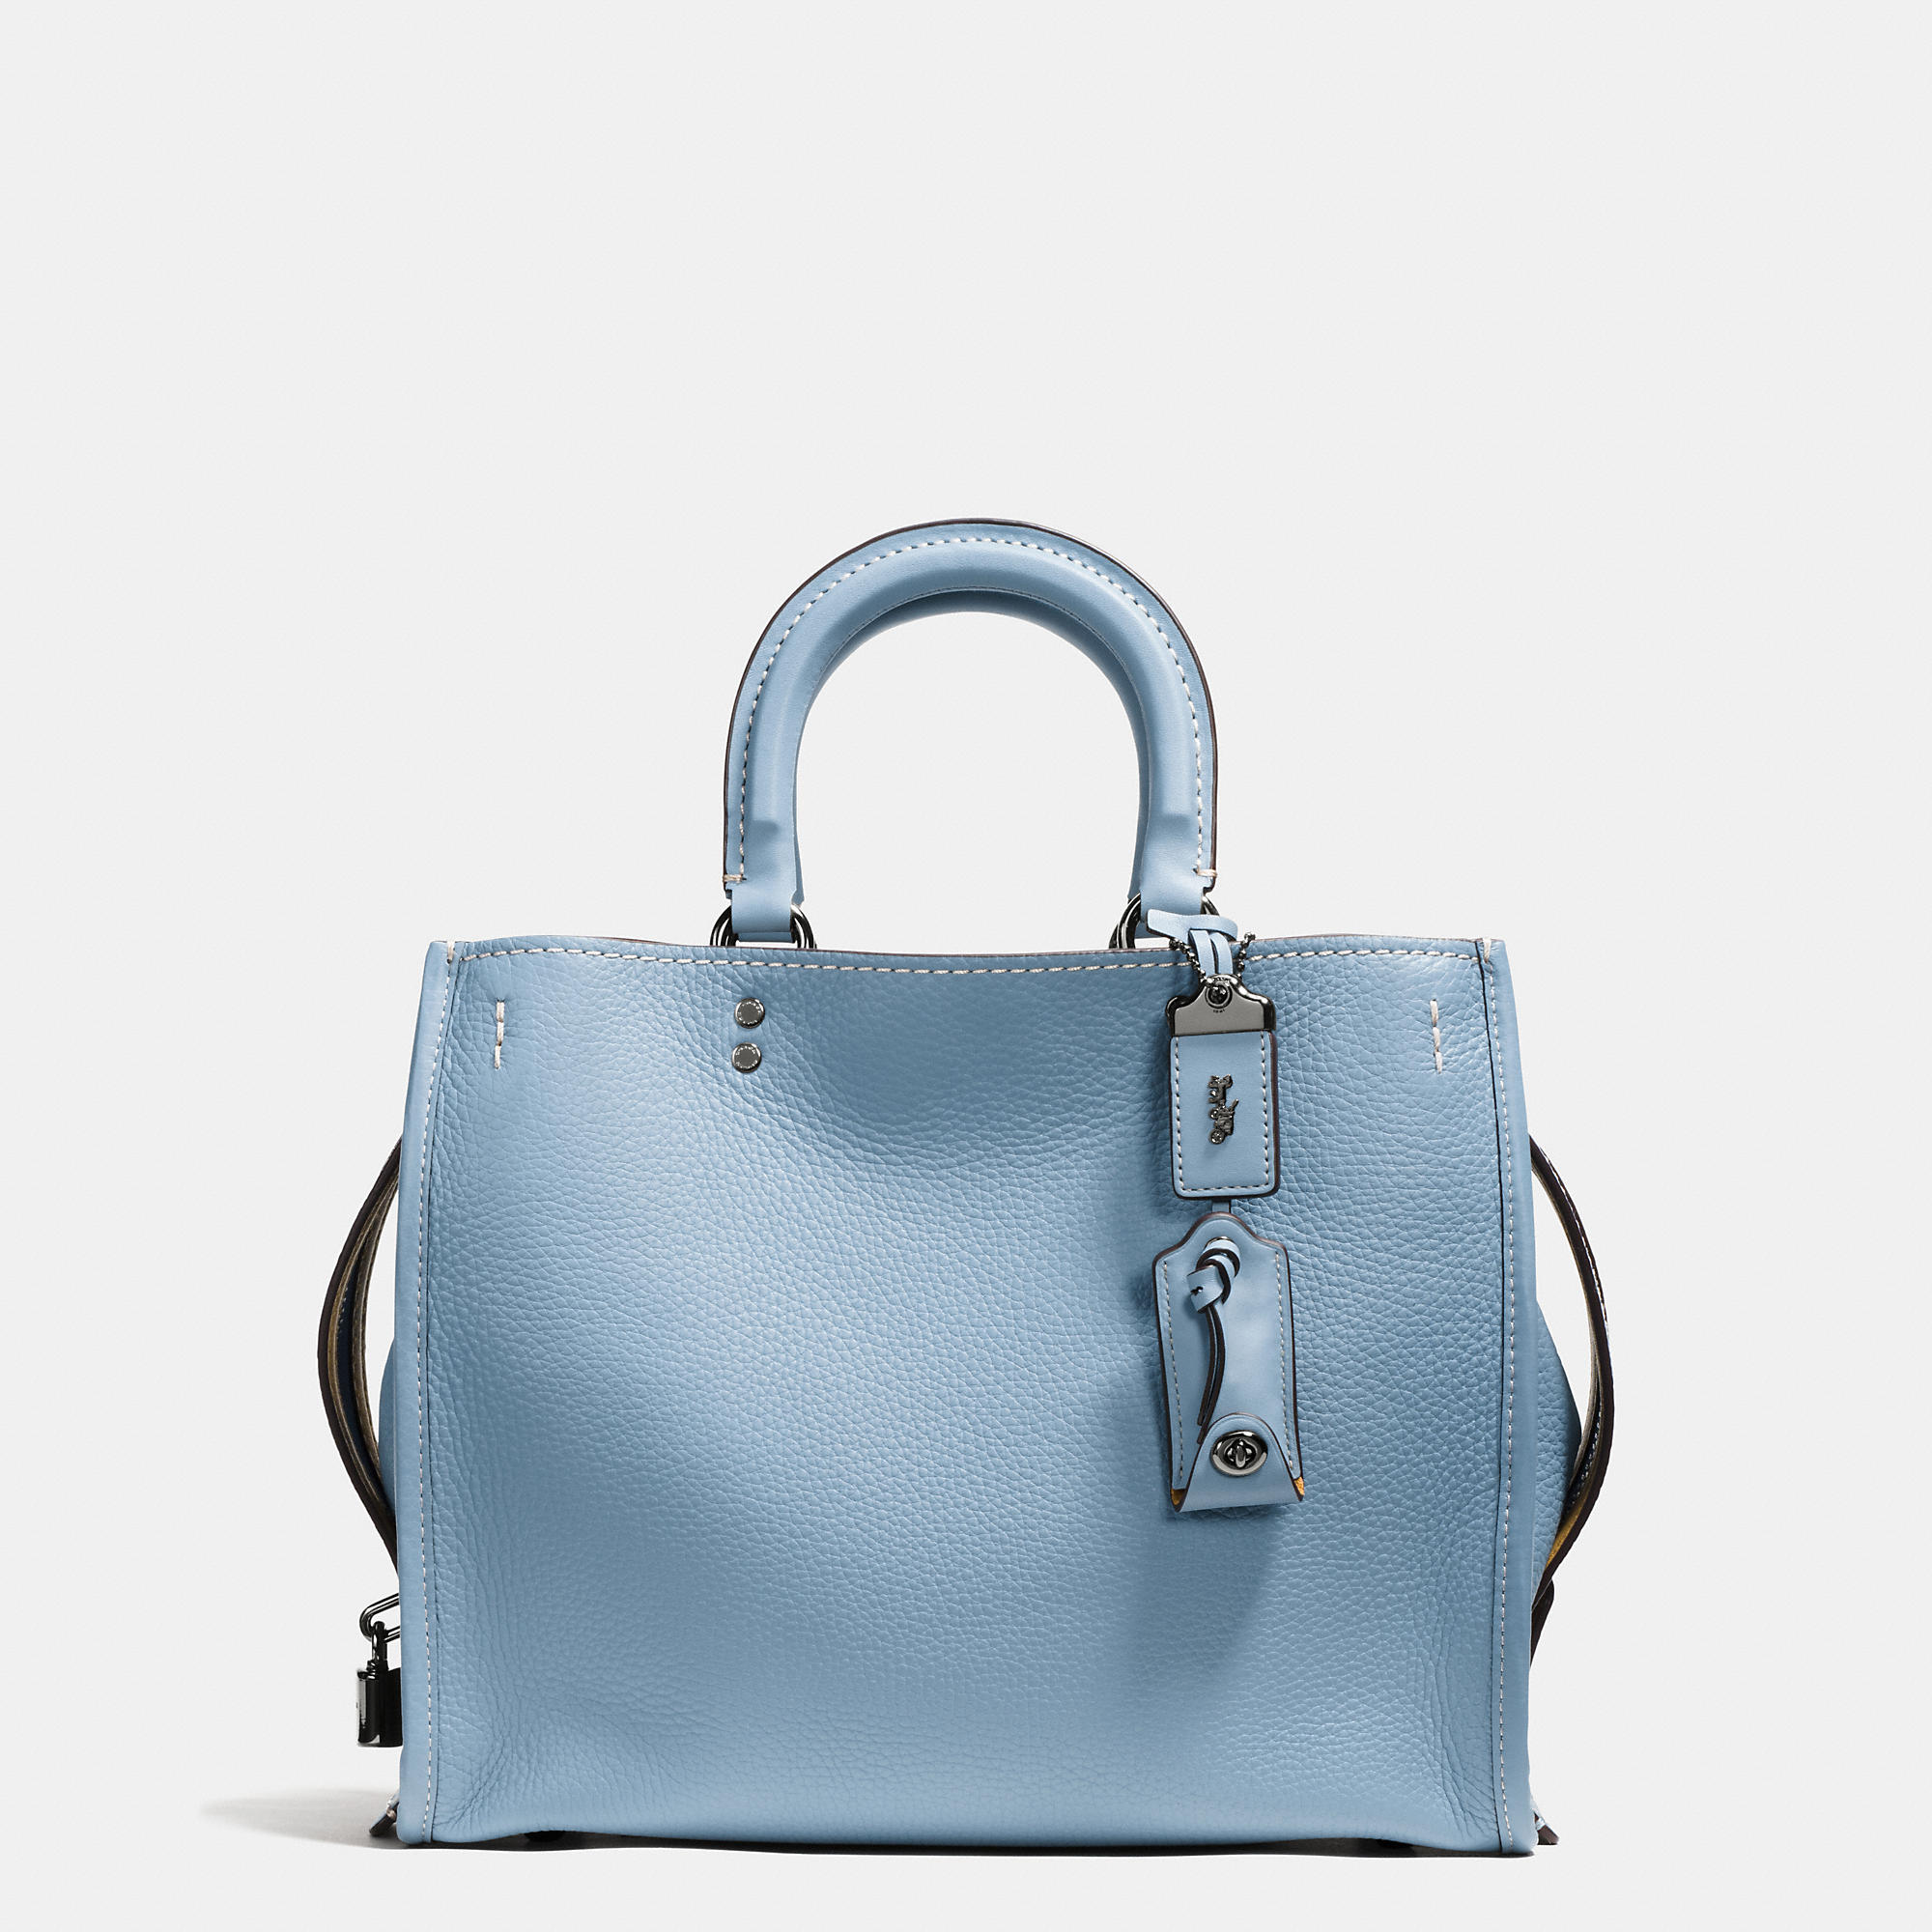 Fashion Coach Rogue Bag In Glovetanned Pebble Leather | Women